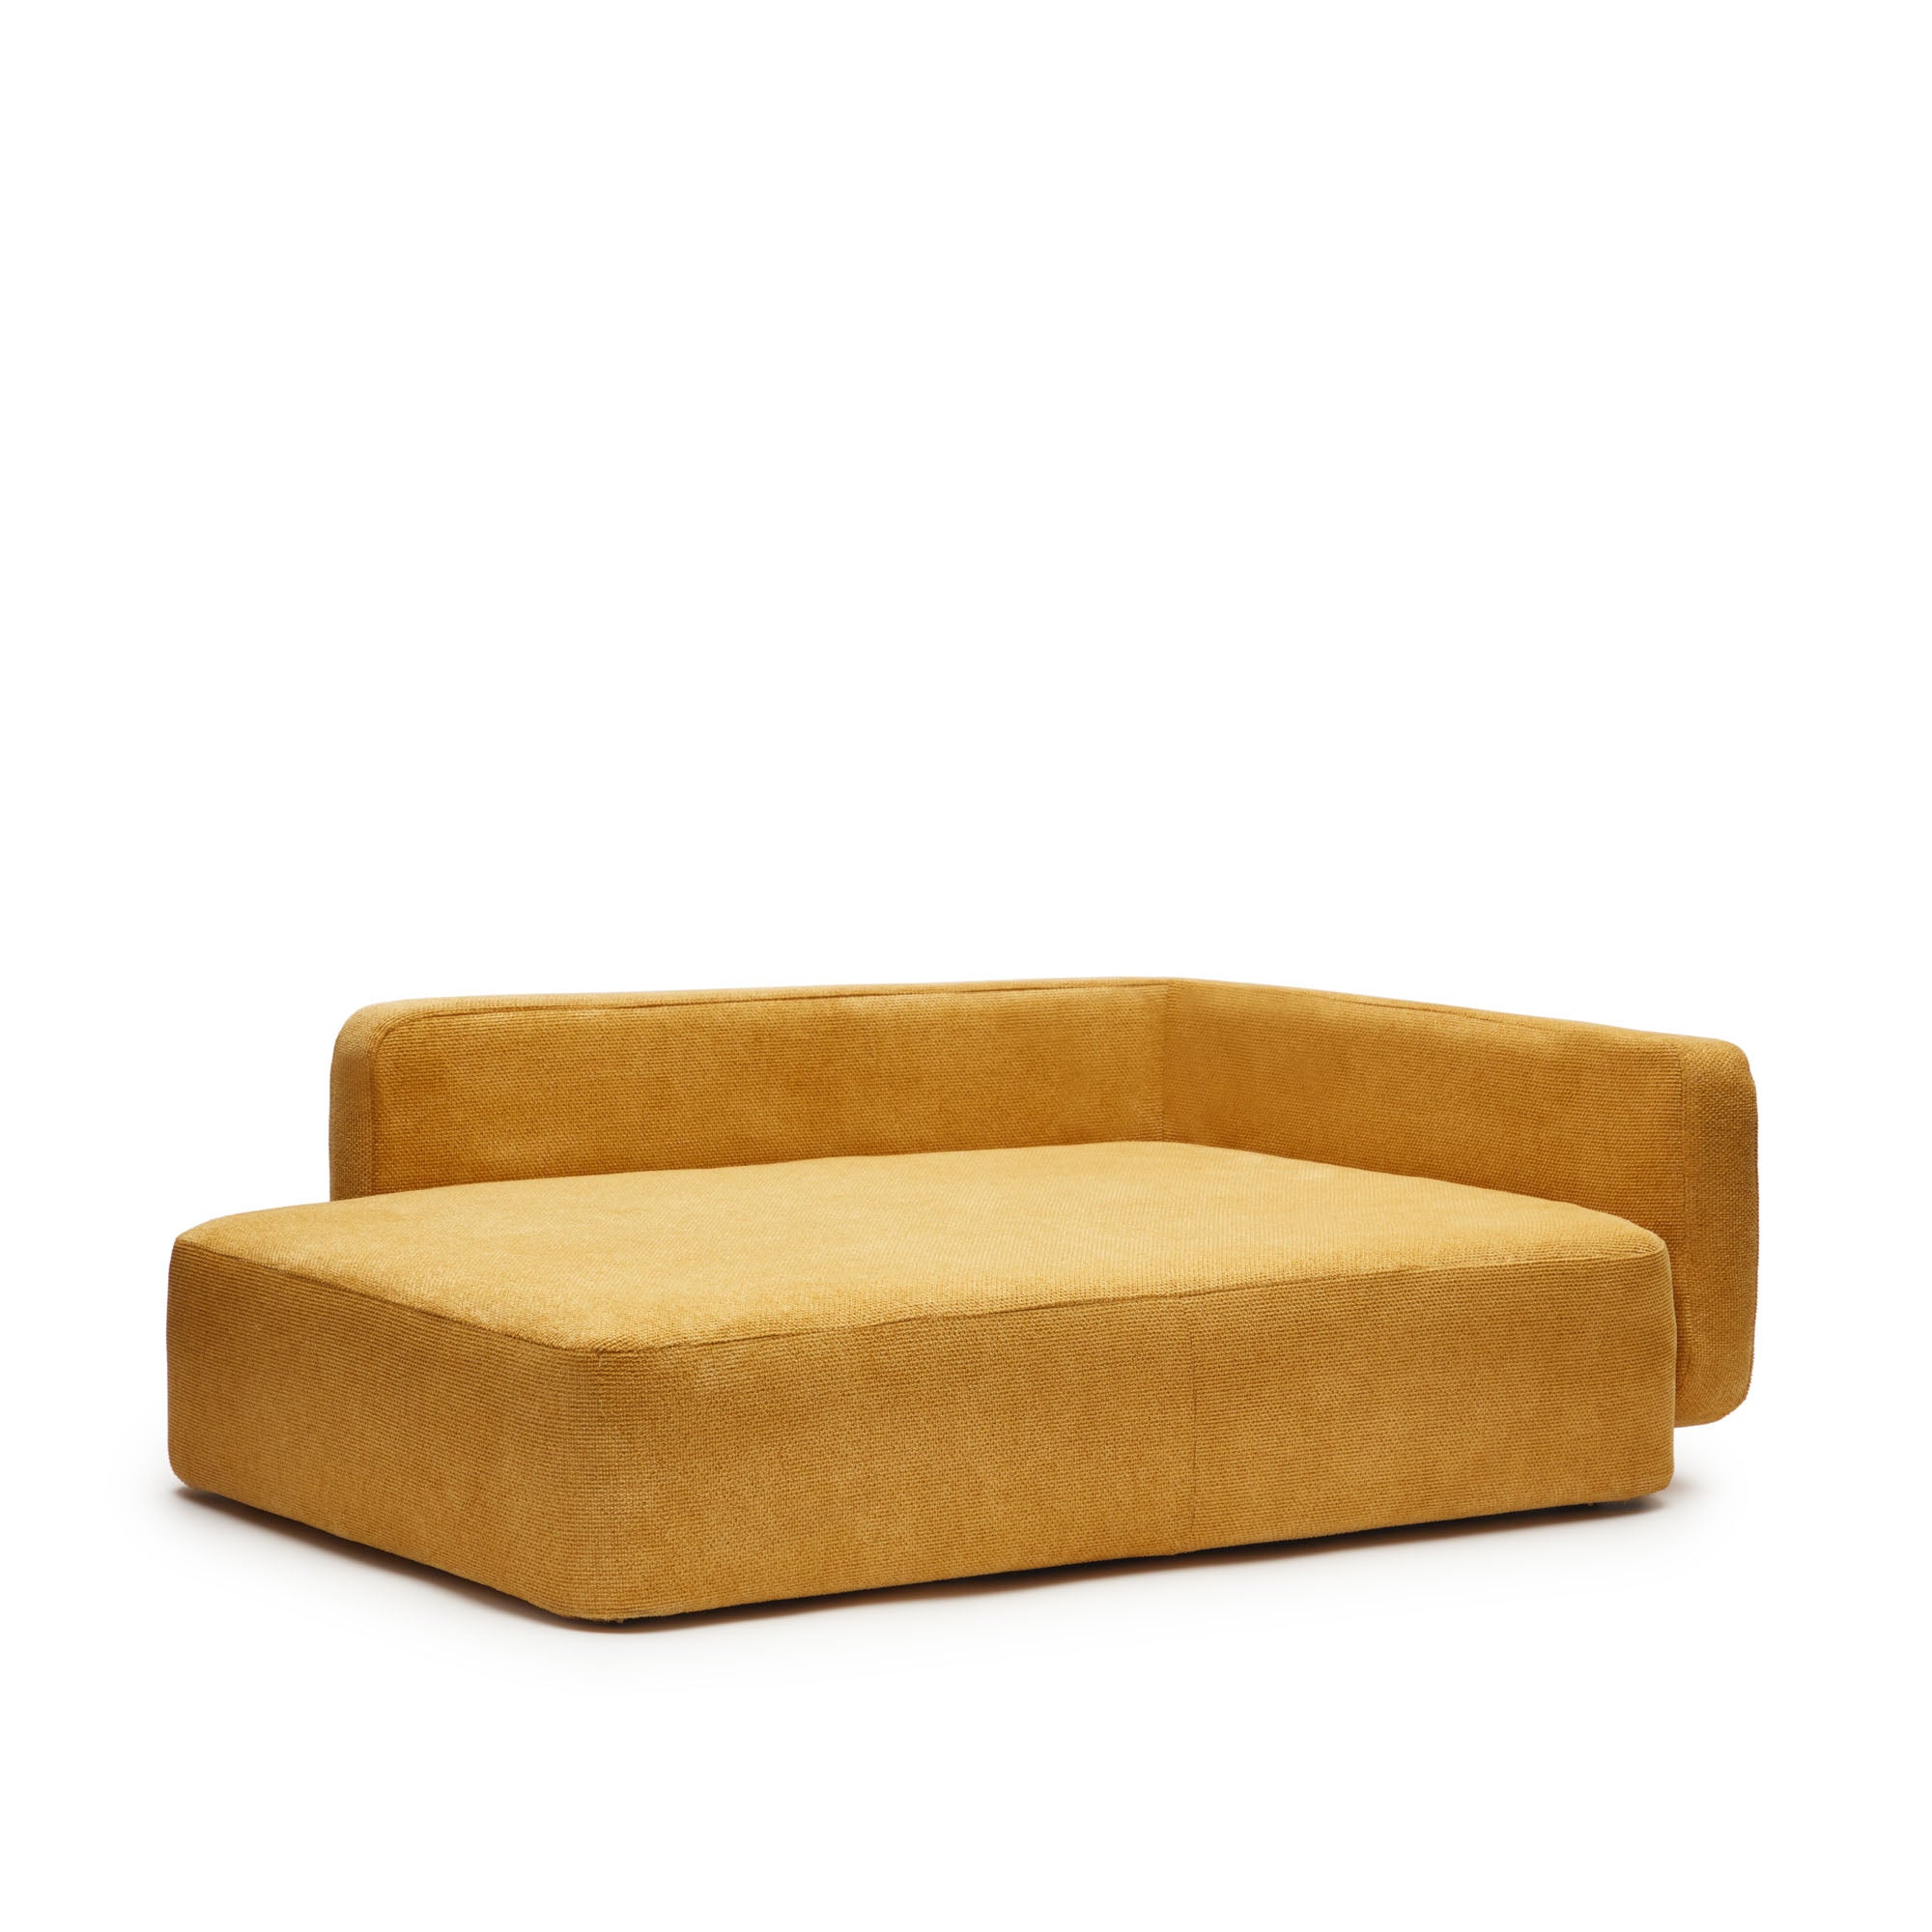 Bowie large bed for pets in mustard 73 x 98 cm